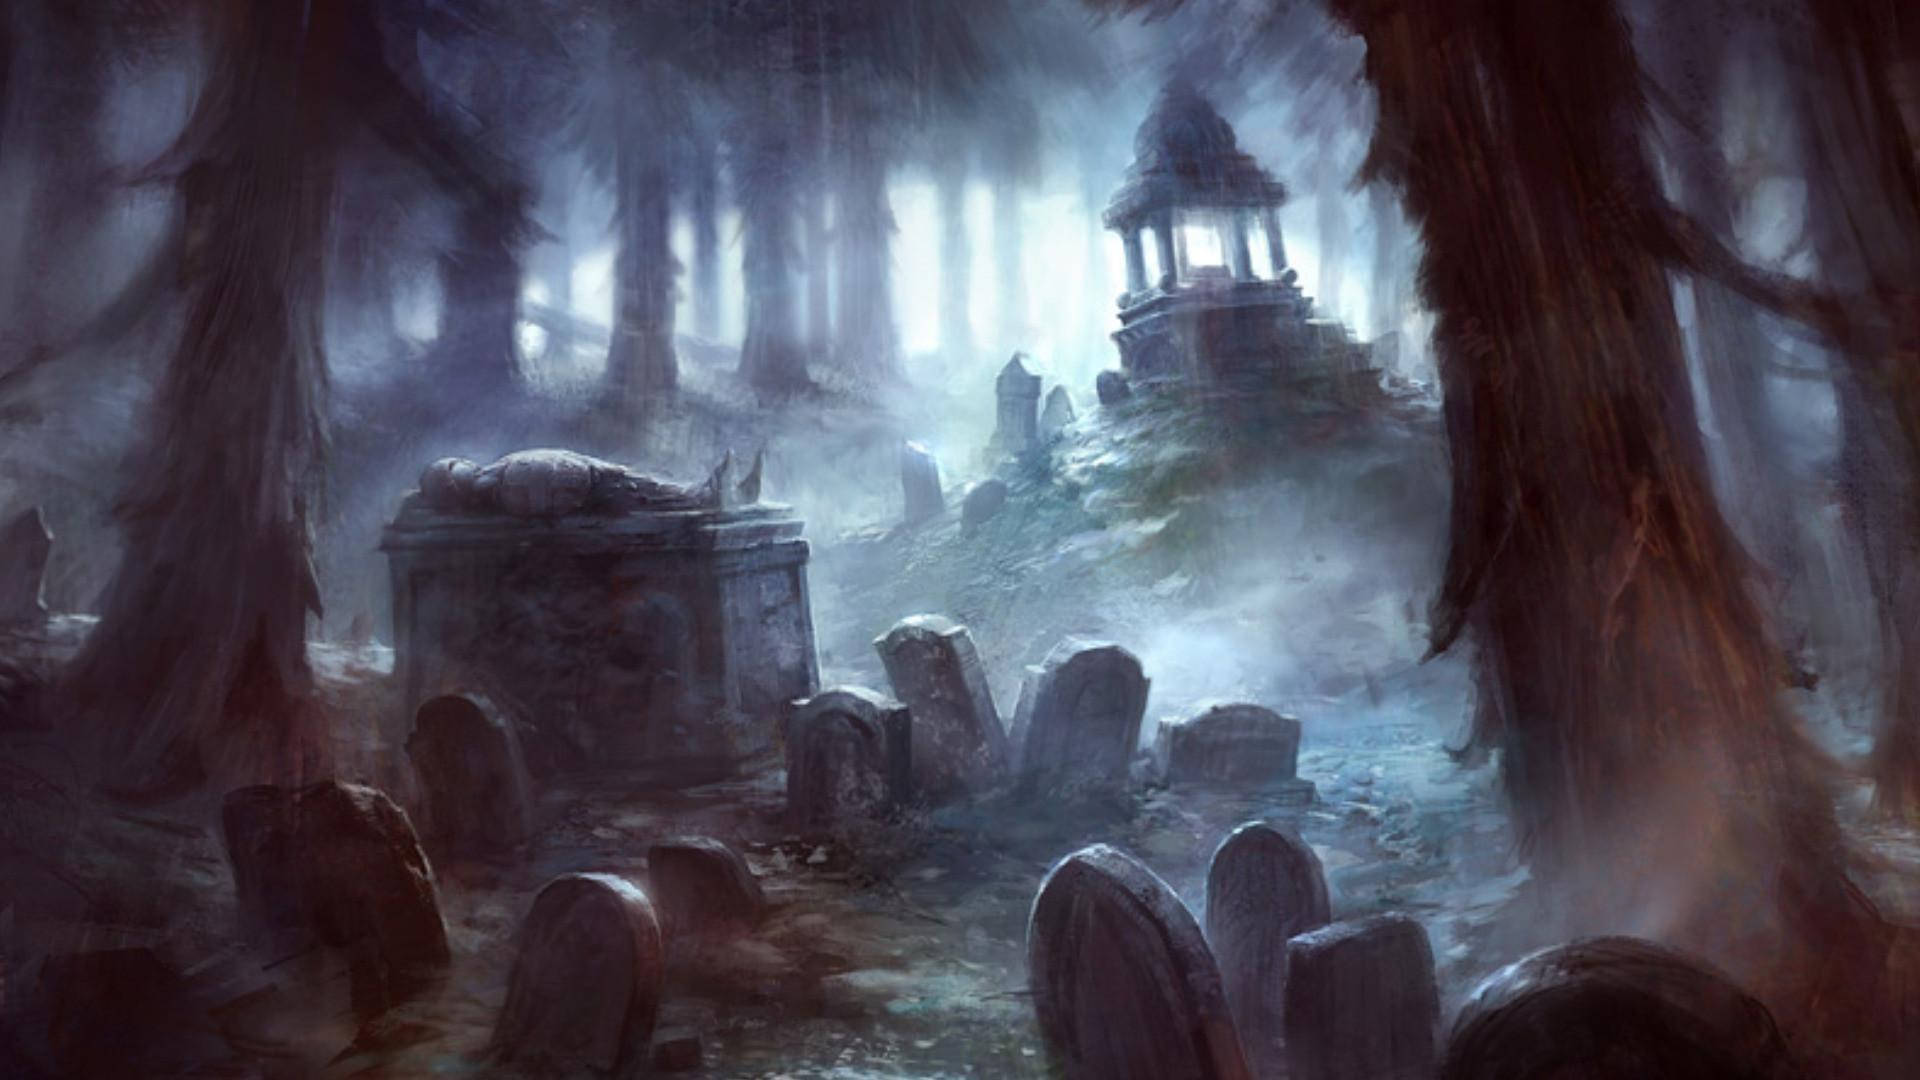 Mysterious Graveyard with Ancient Mausoleums Wallpaper